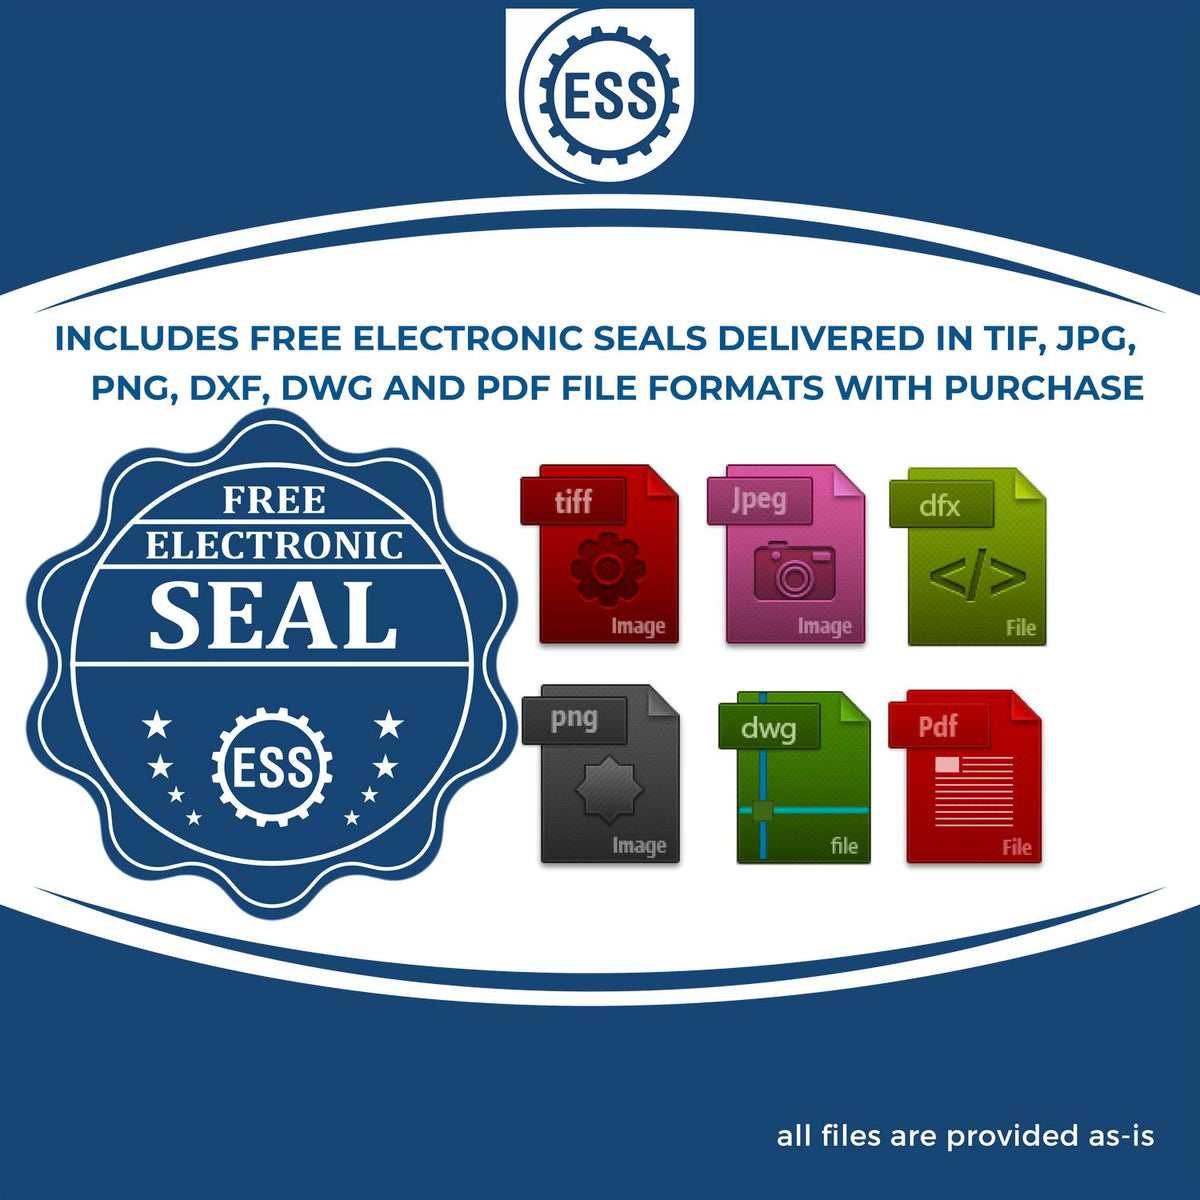 An infographic for the free electronic seal for the Heavy-Duty West Virginia Rectangular Notary Stamp illustrating the different file type icons such as DXF, DWG, TIF, JPG and PNG.